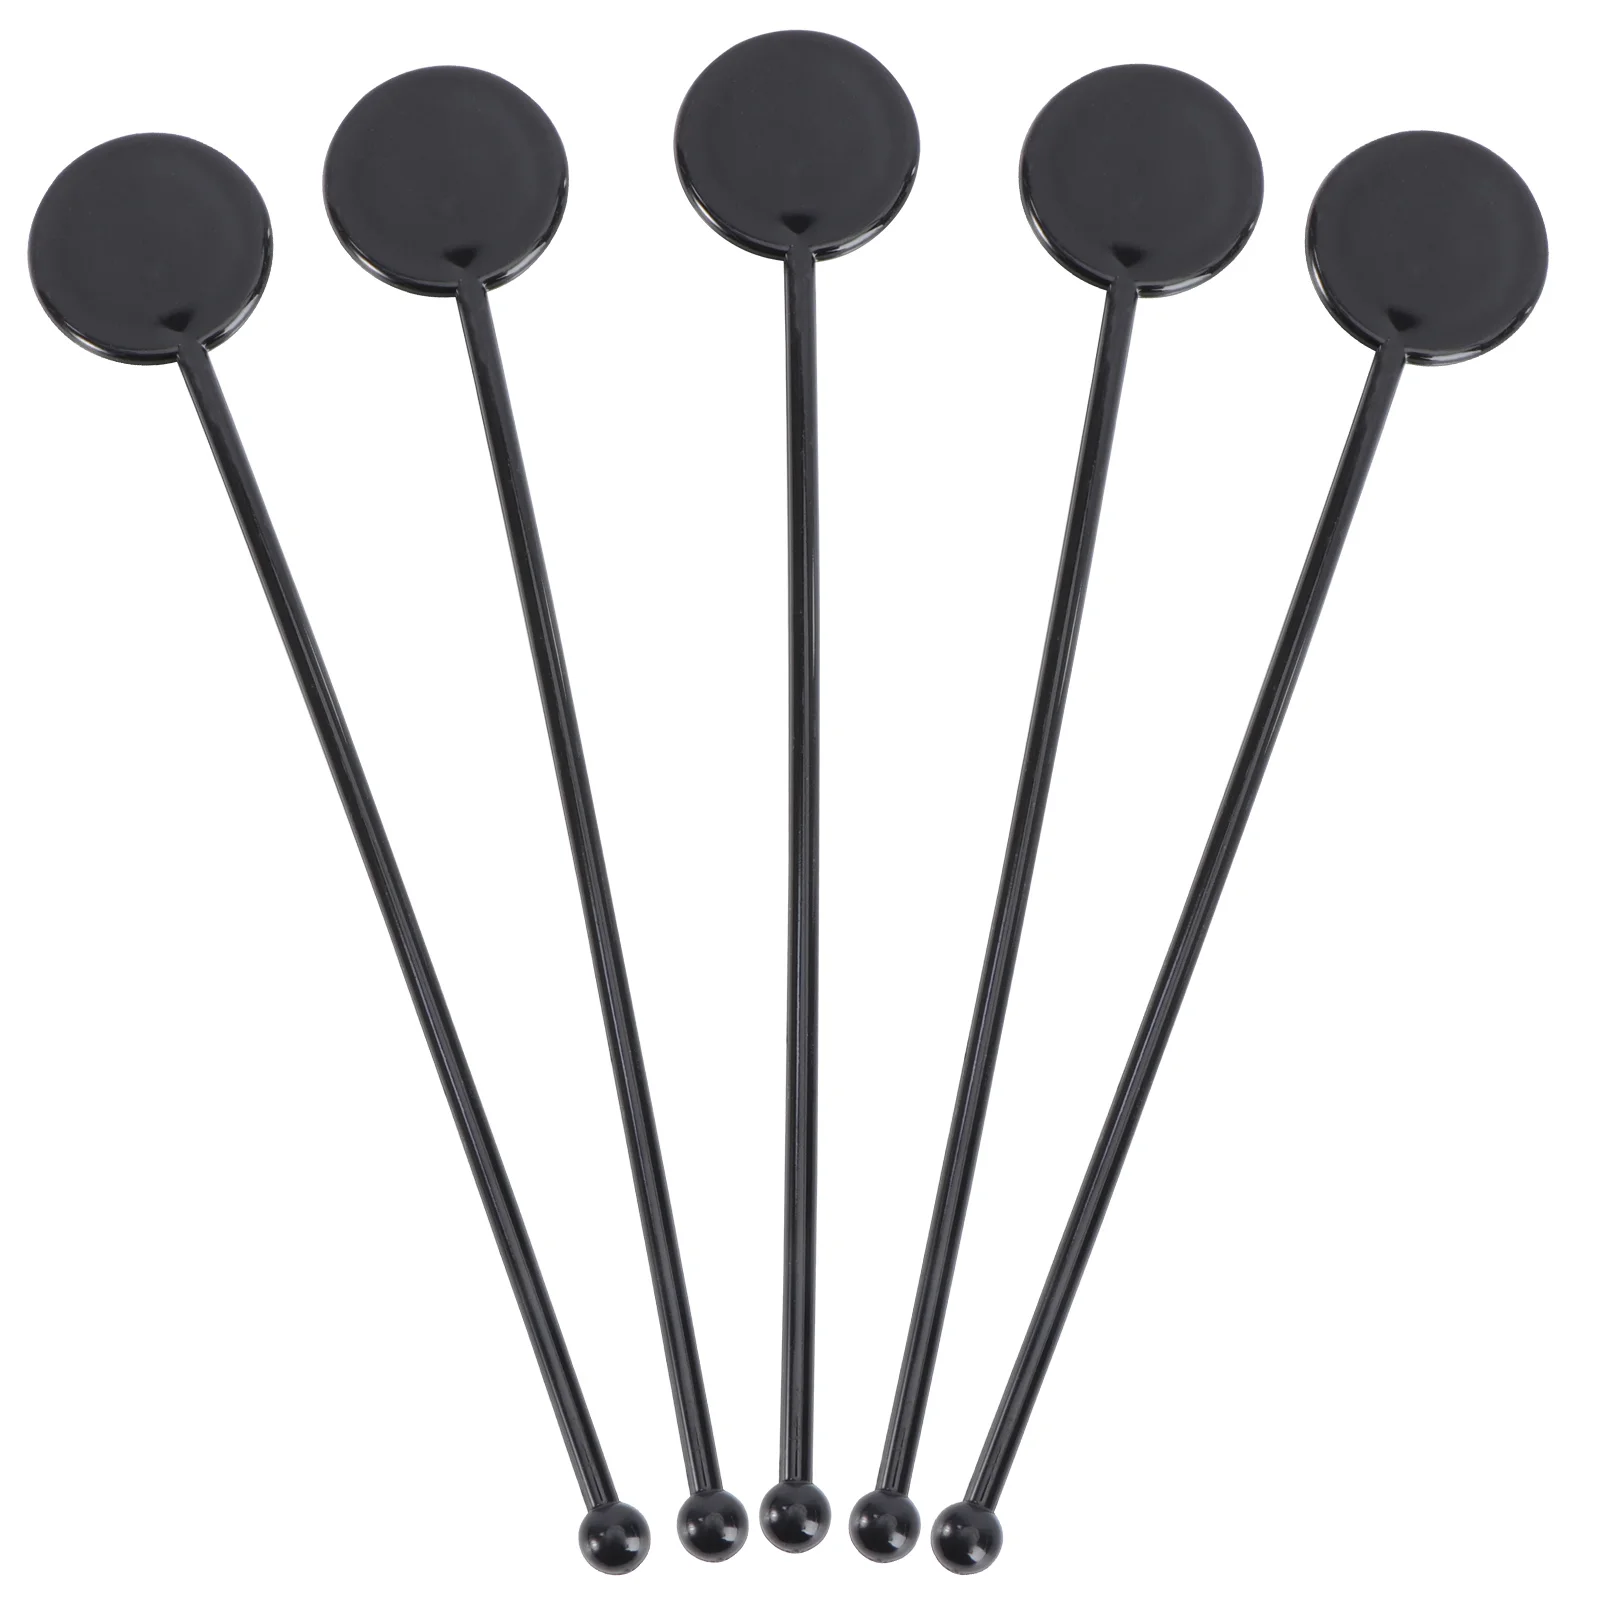 

100PCS Swizzle Sticks for Cocktails Drinks, Round Shaped Swizzle Sticks for Drinks Coffee Cocktail Stirrer for Restaurant Home